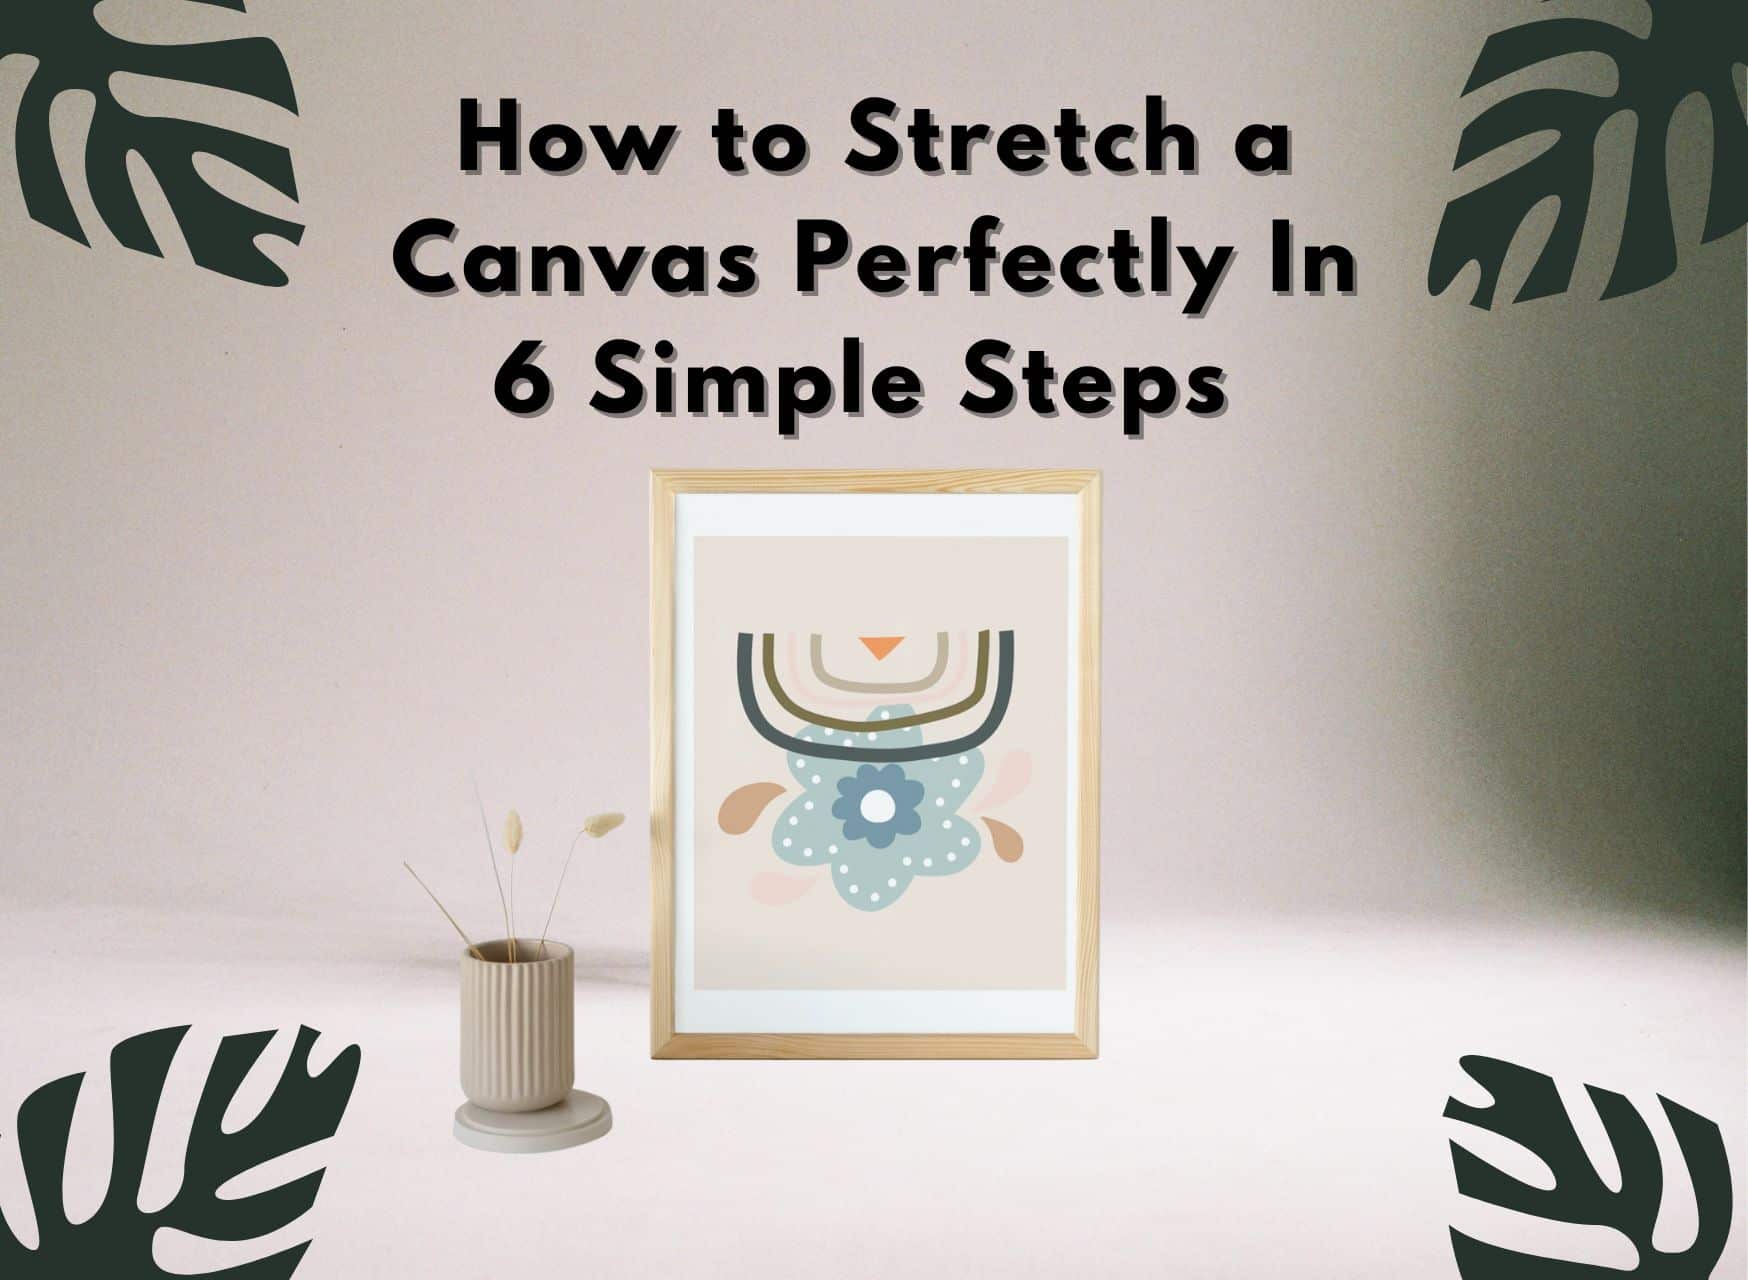 How To Stretch A Canvas Perfectly In 6 Simple Steps